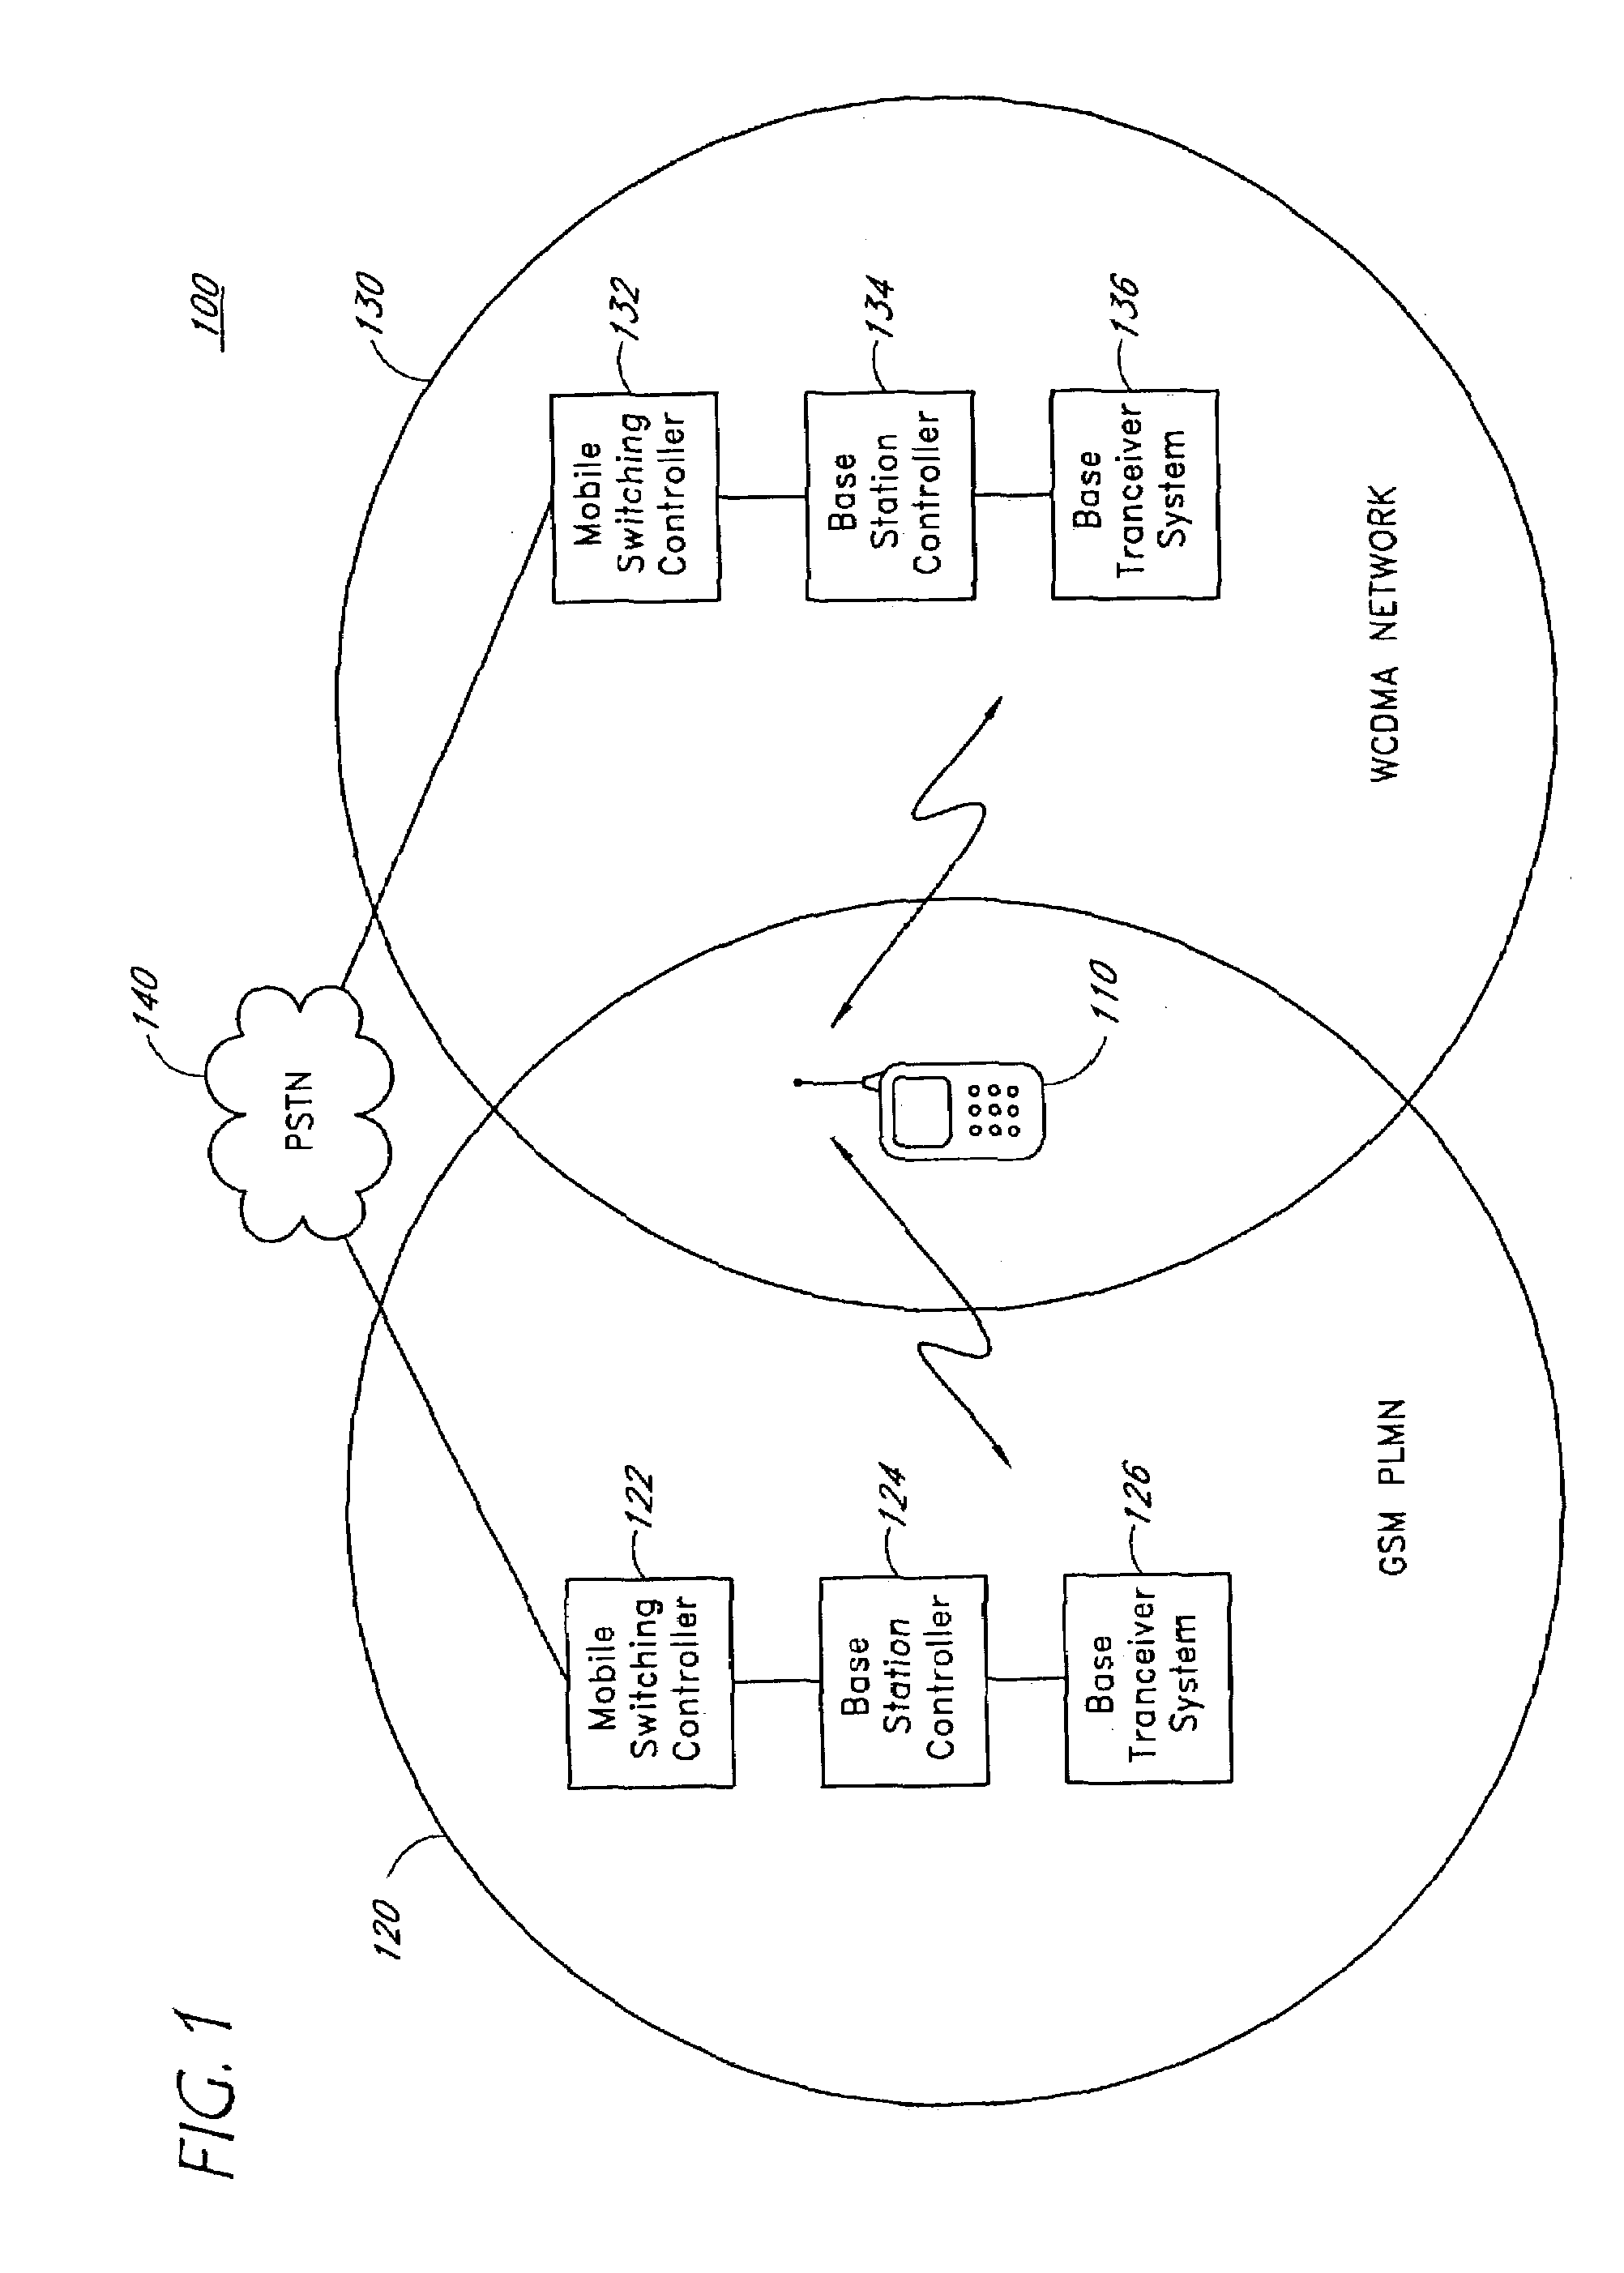 Shared receive path for simultaneous received signals